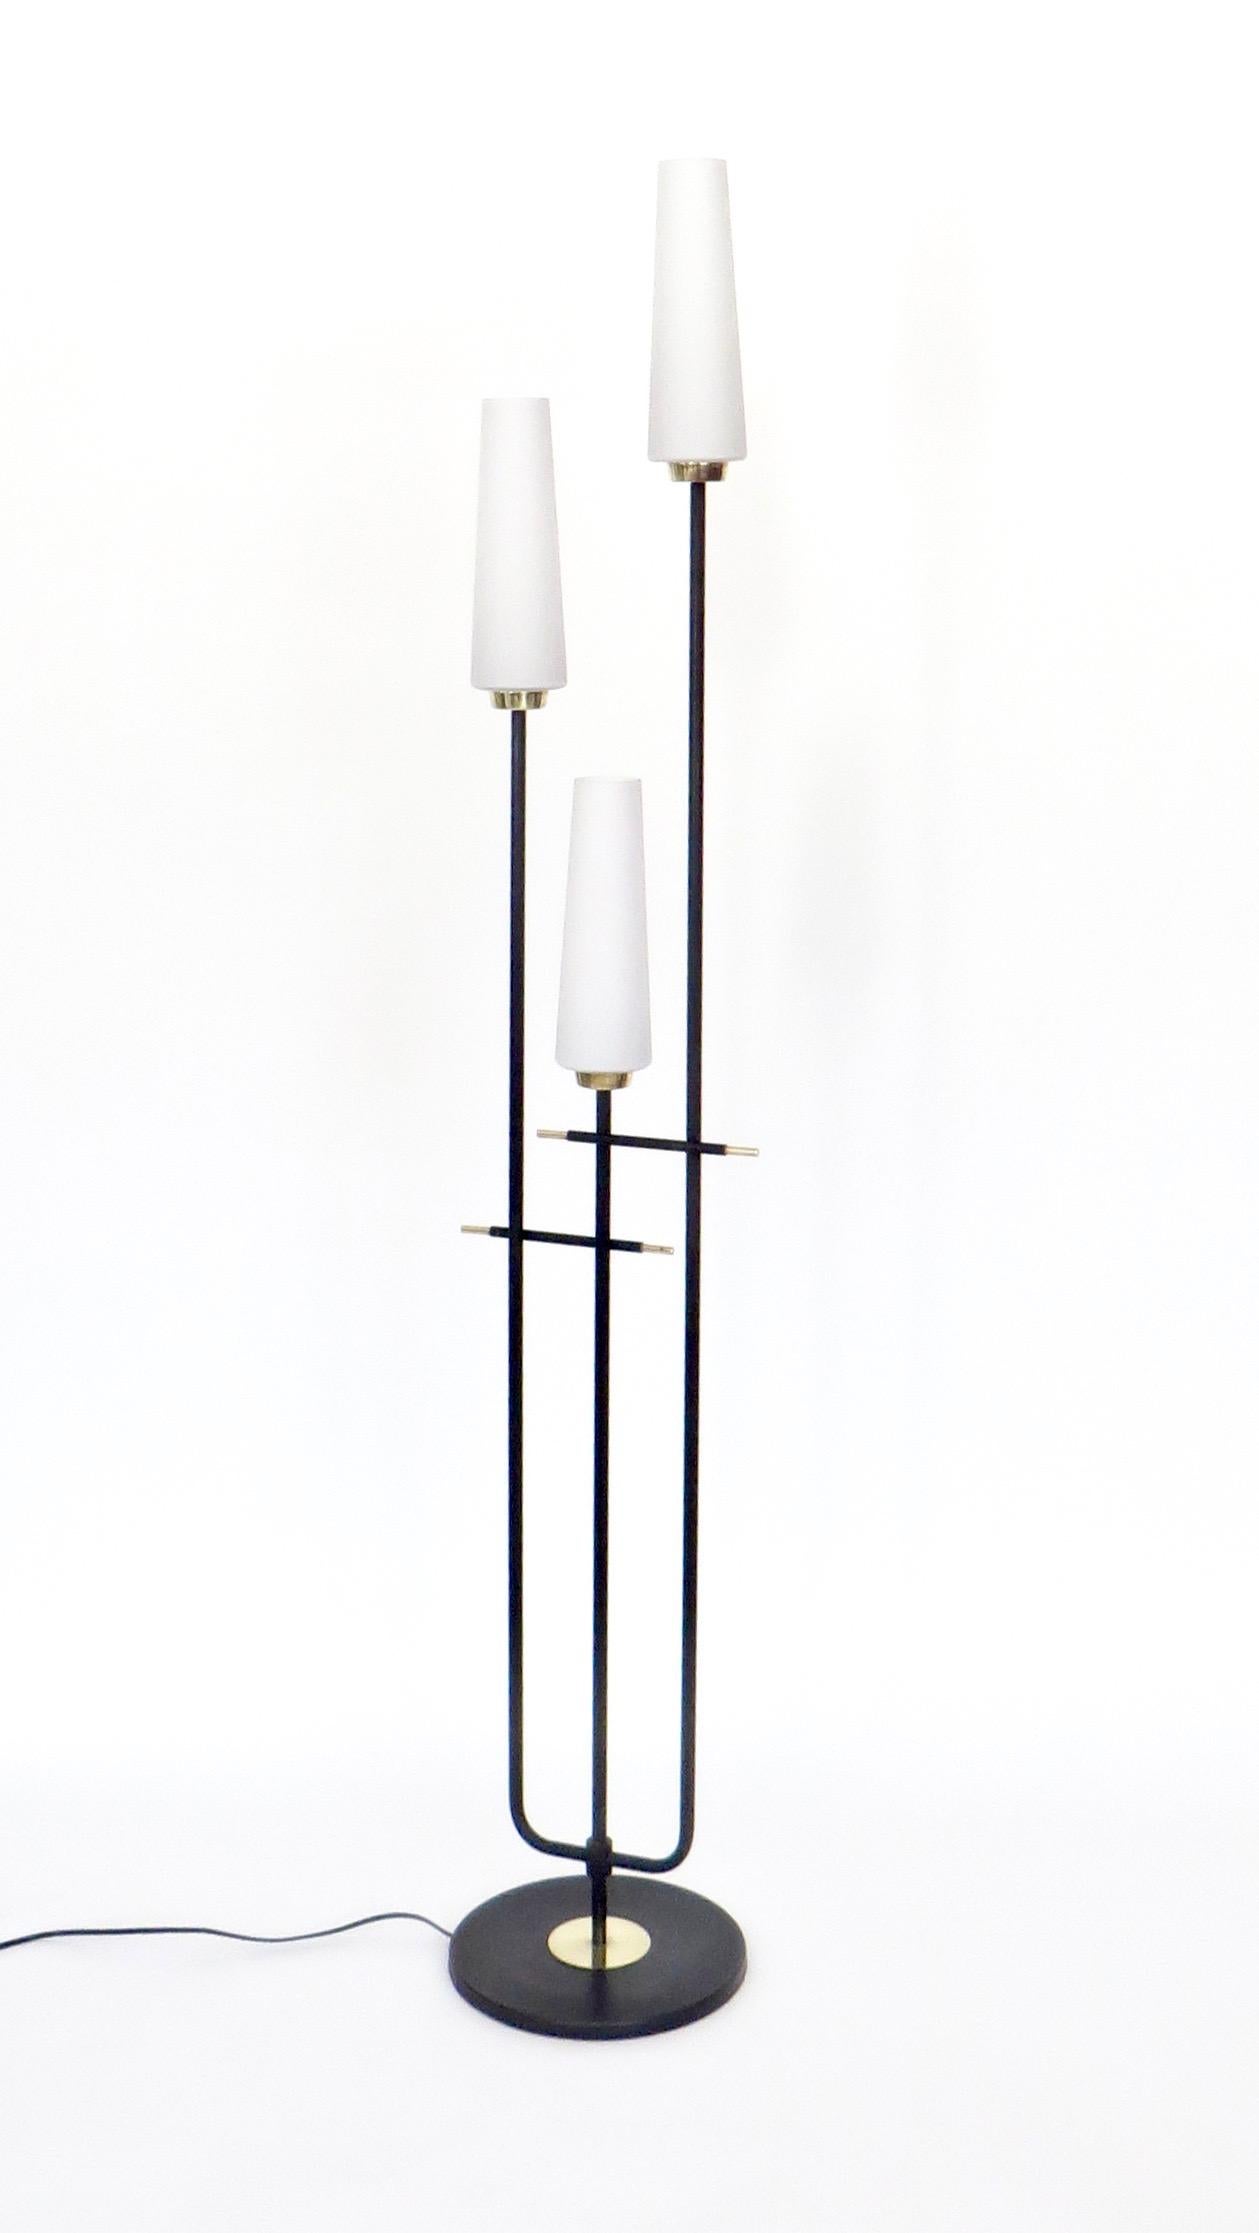 French floor lamp by Maison Lunel, black iron with brass accents, and three cased, blown glass shades. Rewired for USA. Takes candelabra base bulbs, 60w maximum.